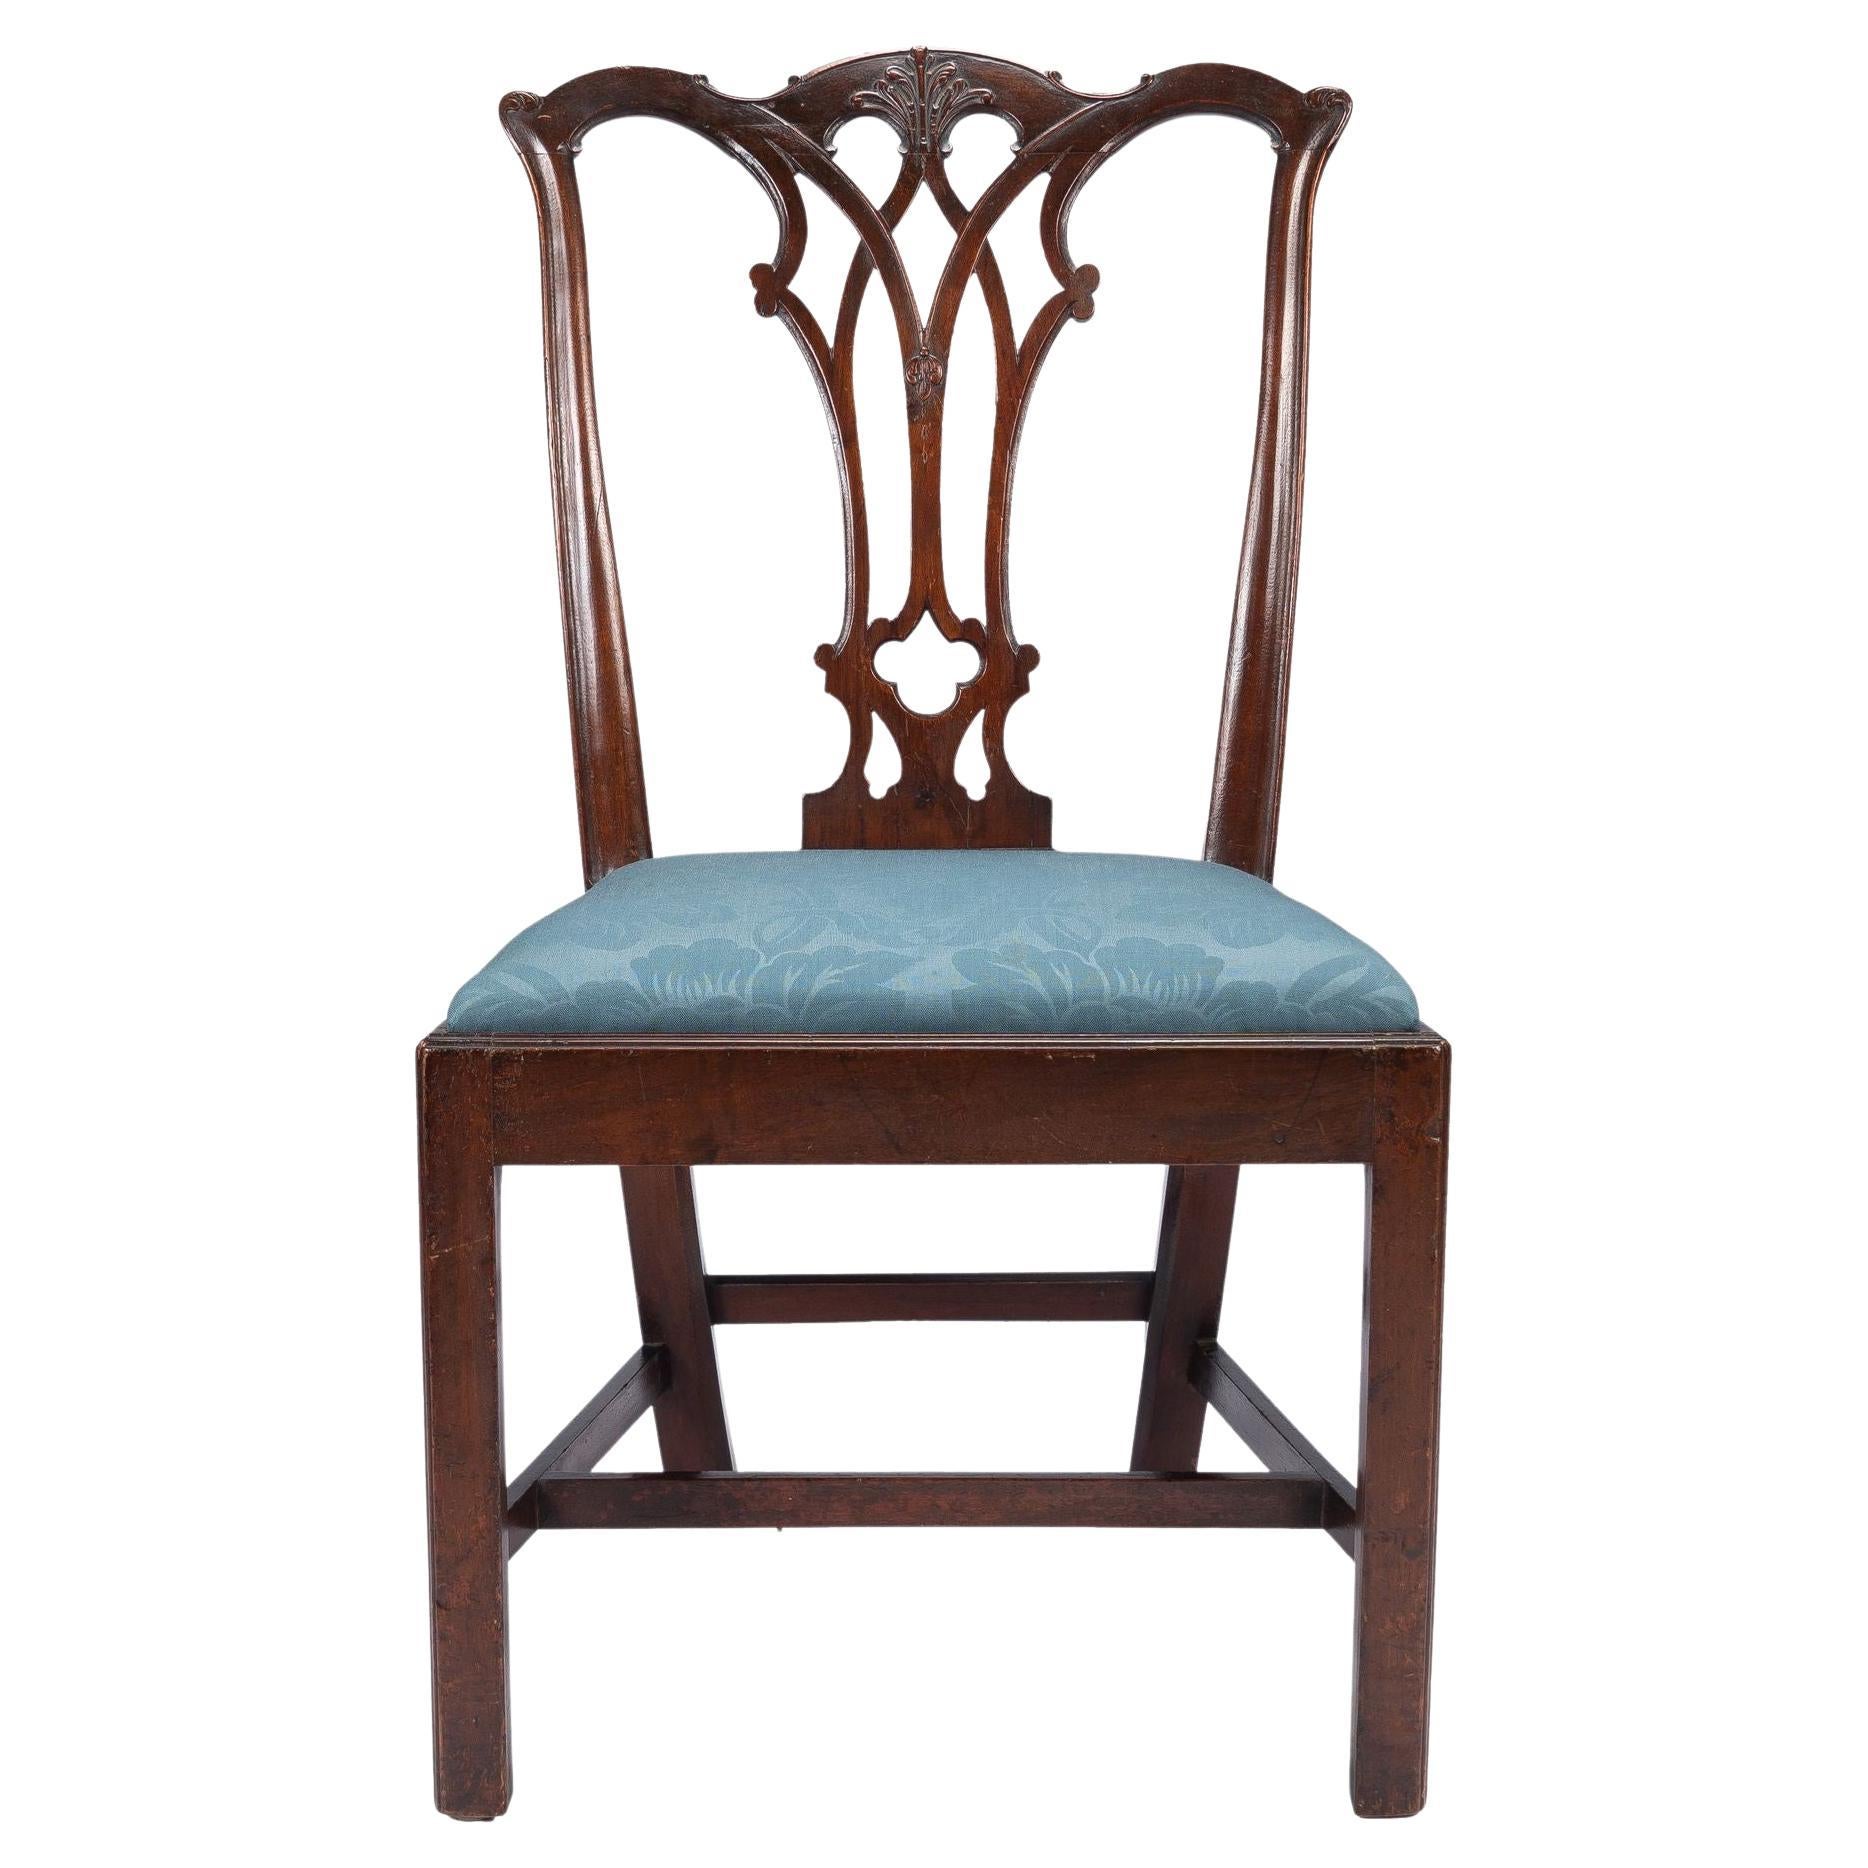 Philadelphia Chippendale Mahogany Slip Seat Side Chair by Thomas Tuft, 1770 For Sale